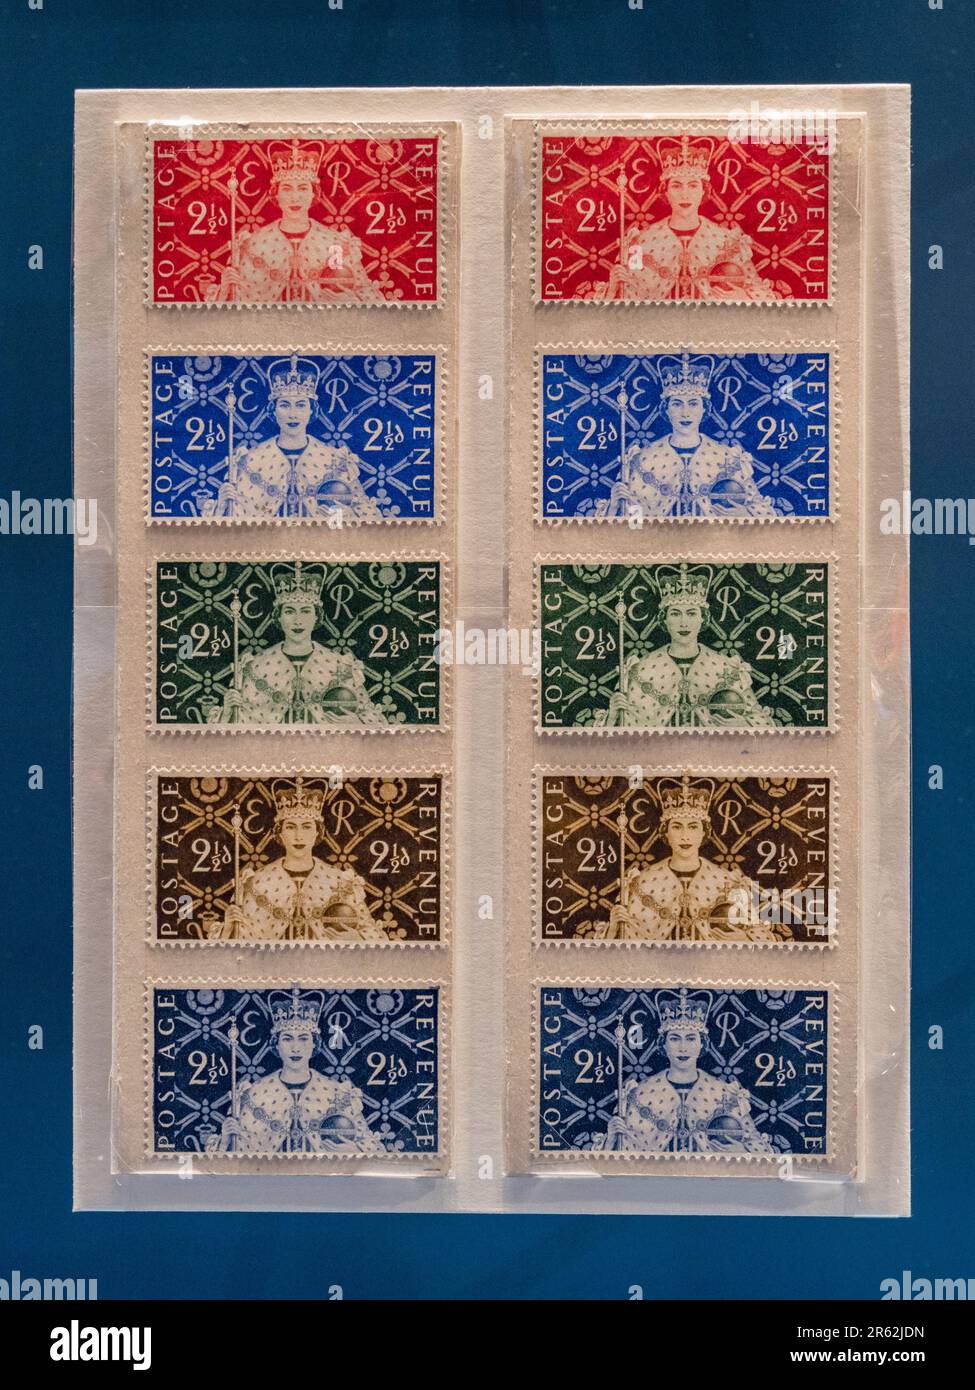 Coronation stamps with a portrait by Edmund Dulac for Queen Elizabeth II on display in the Postal Museum in London, UK. Stock Photo